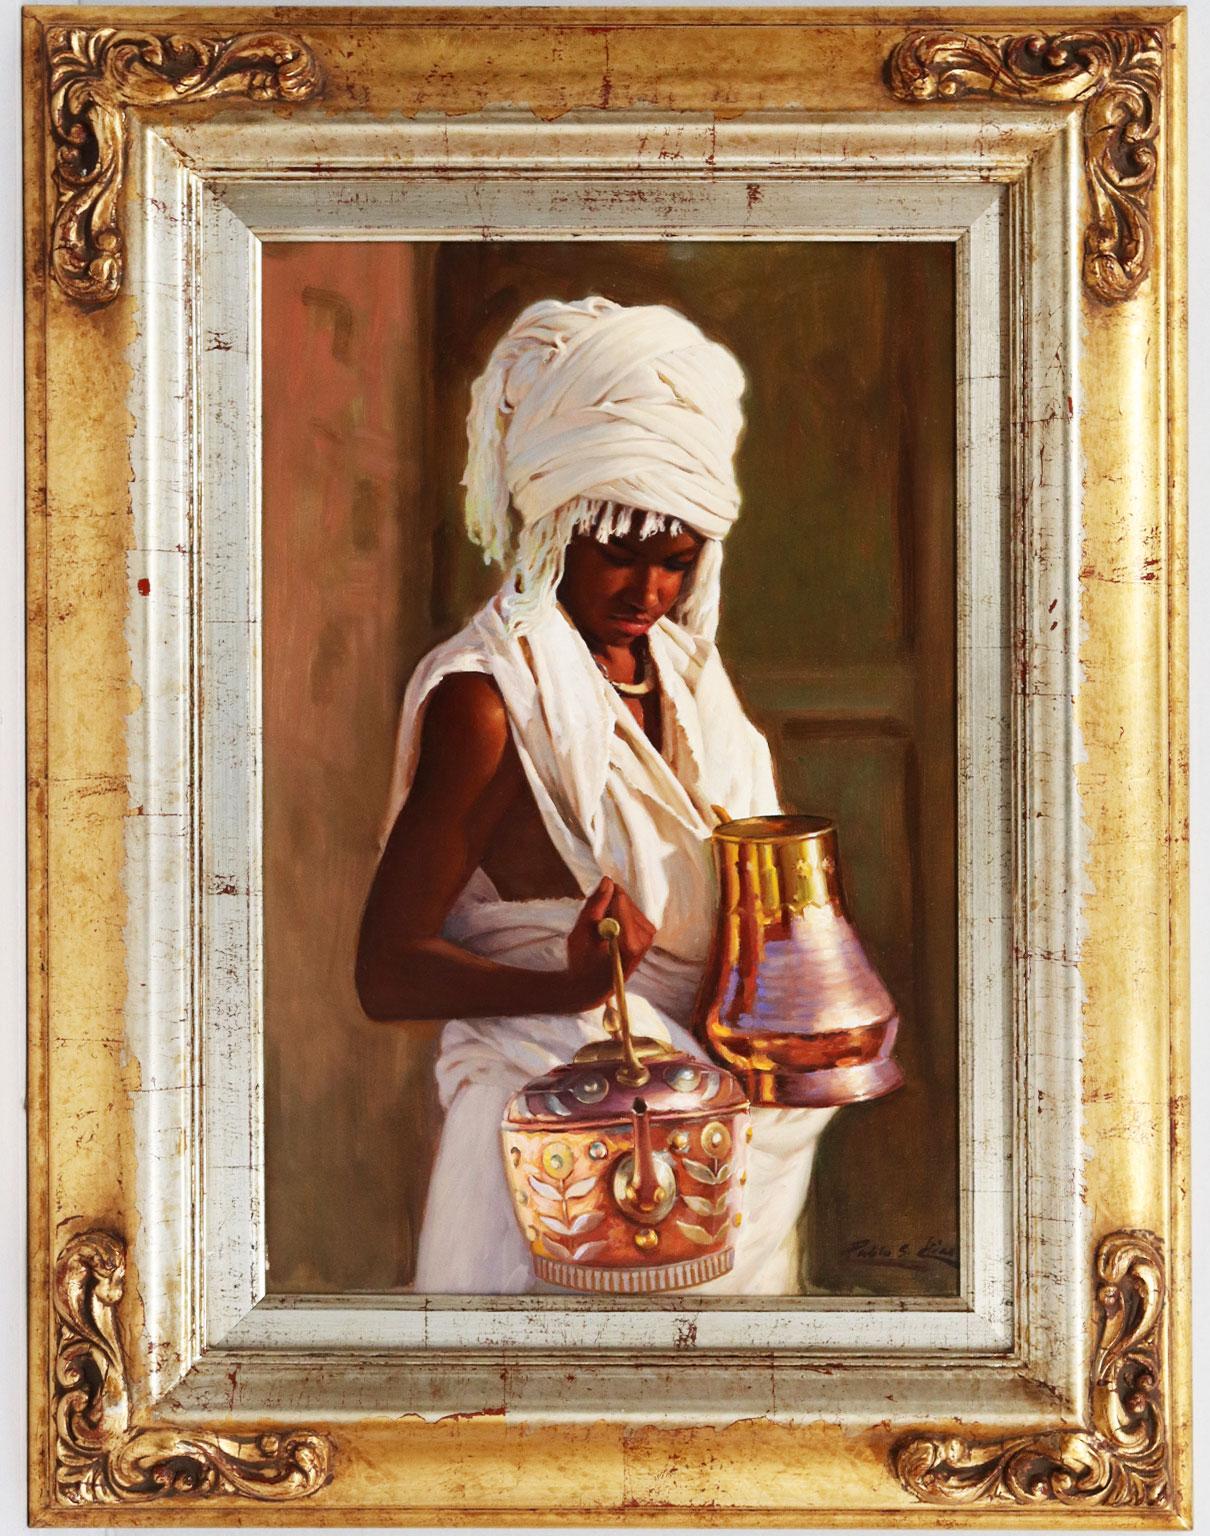 Oriental Young with Jars - Chías Oil painting on canvas Realism